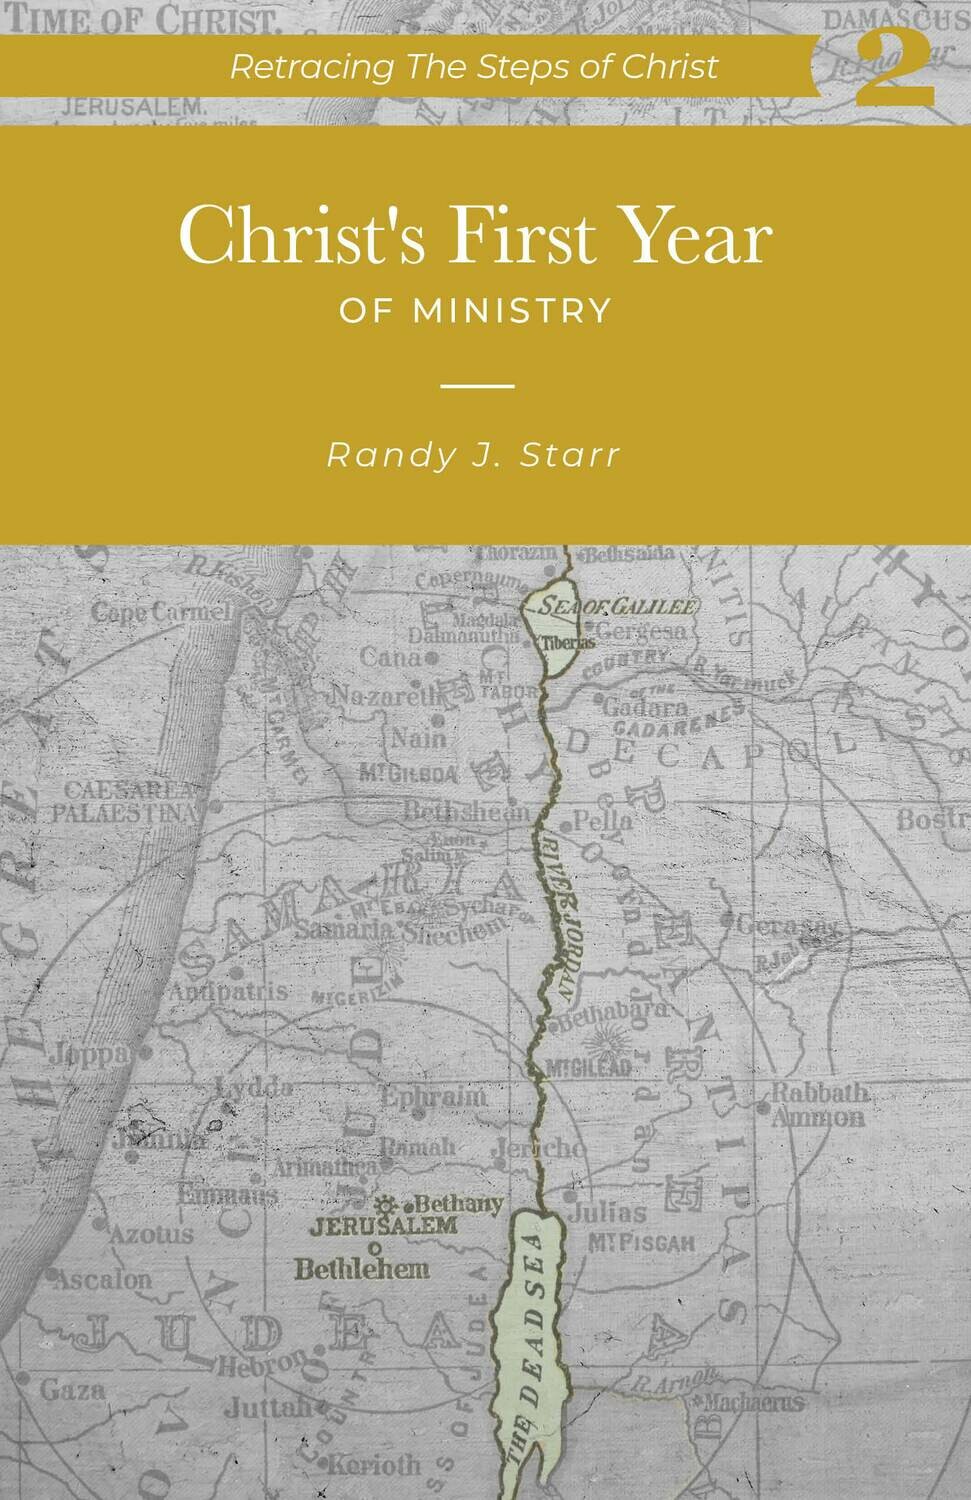 Retracing the Steps of Christ, v. 2 of 6 volumes - Christ's First Year of Ministry